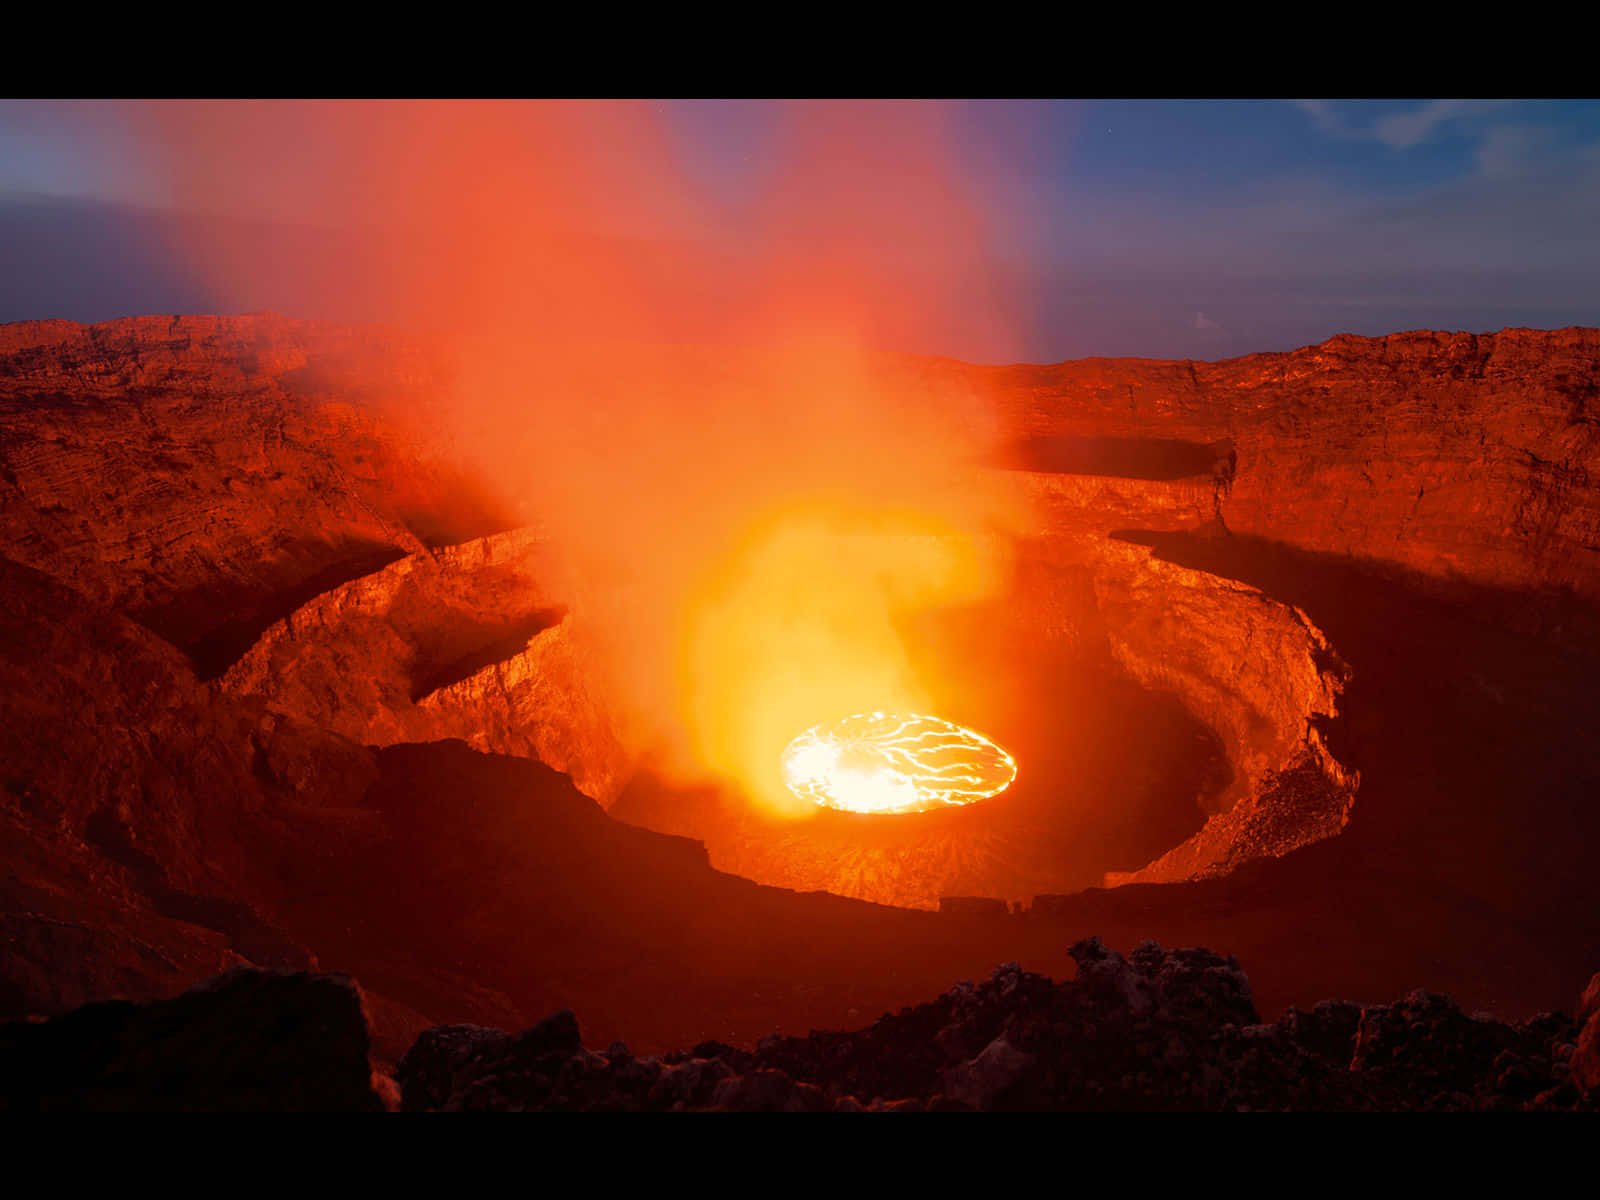 Witness the fury of nature's power with this stunning view of an active volcano.